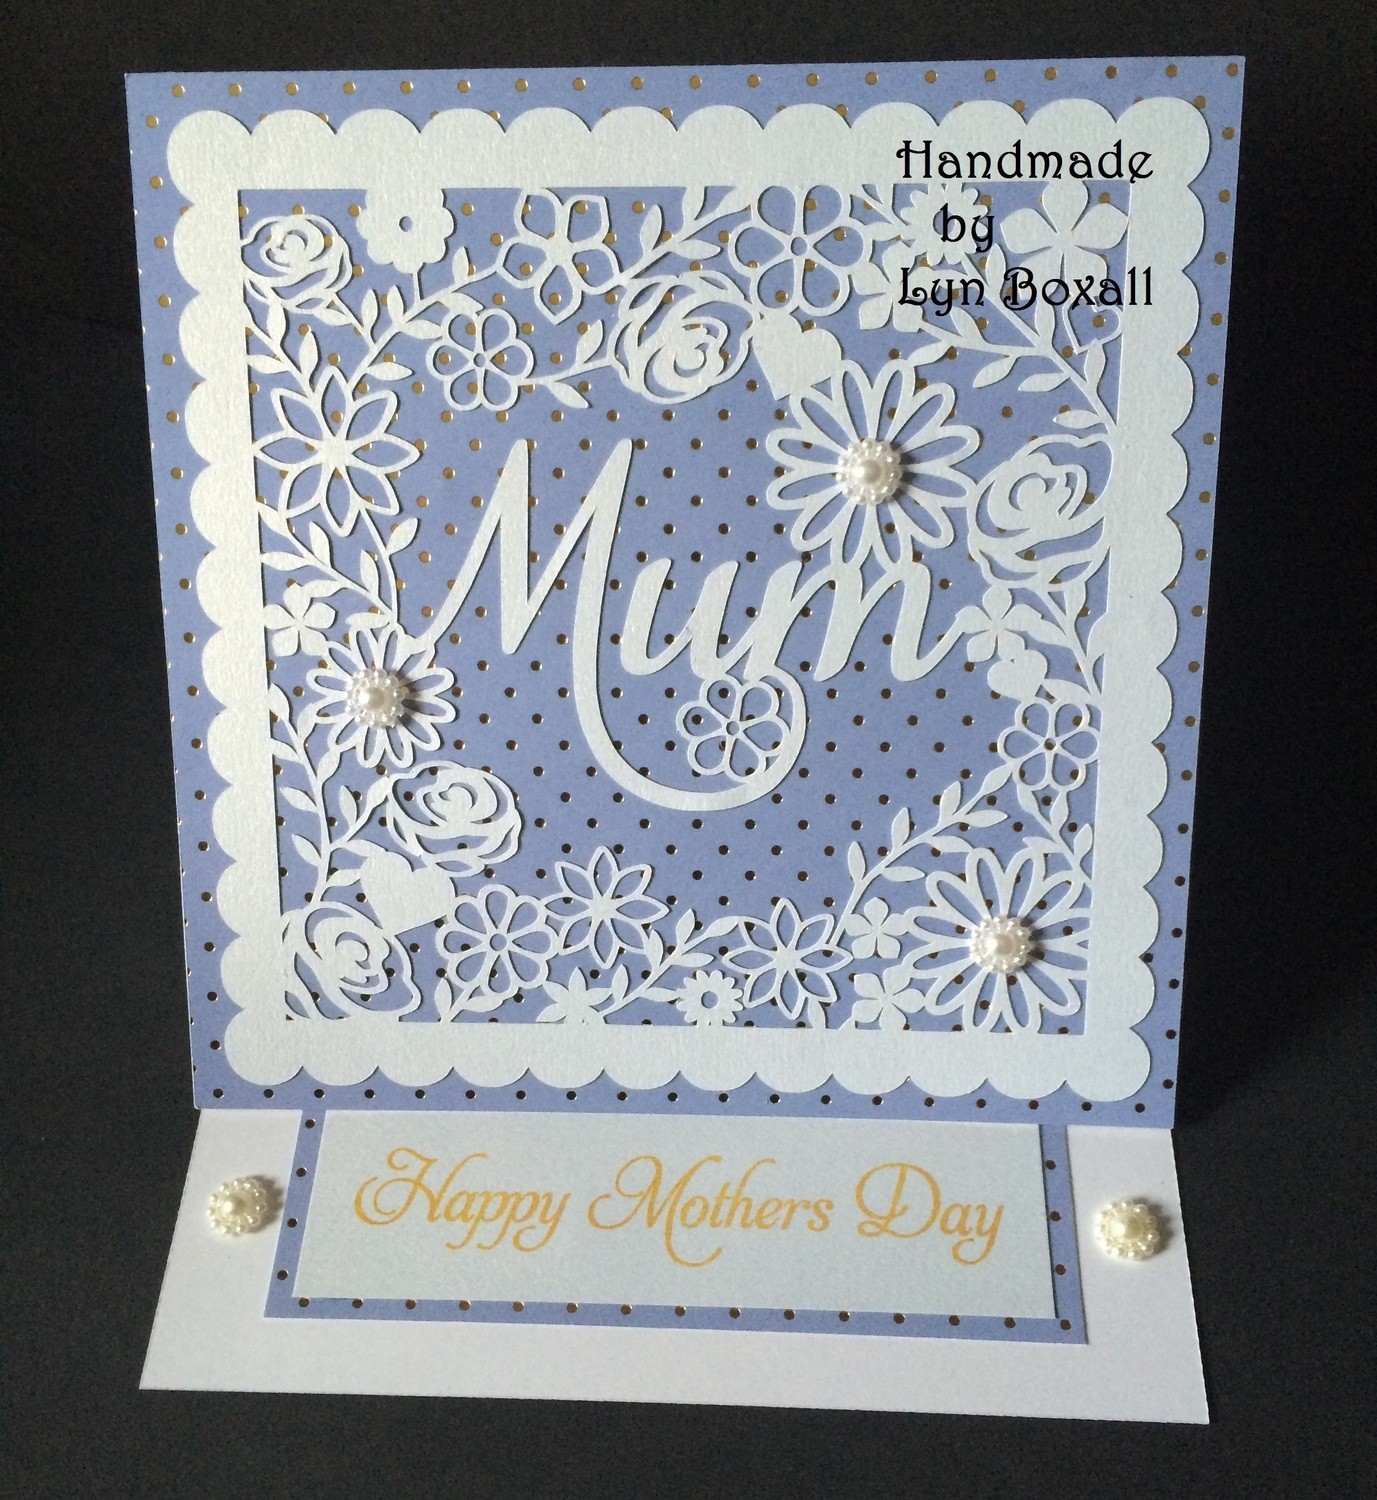 Mum decorative frame ideal for Mother's Day.